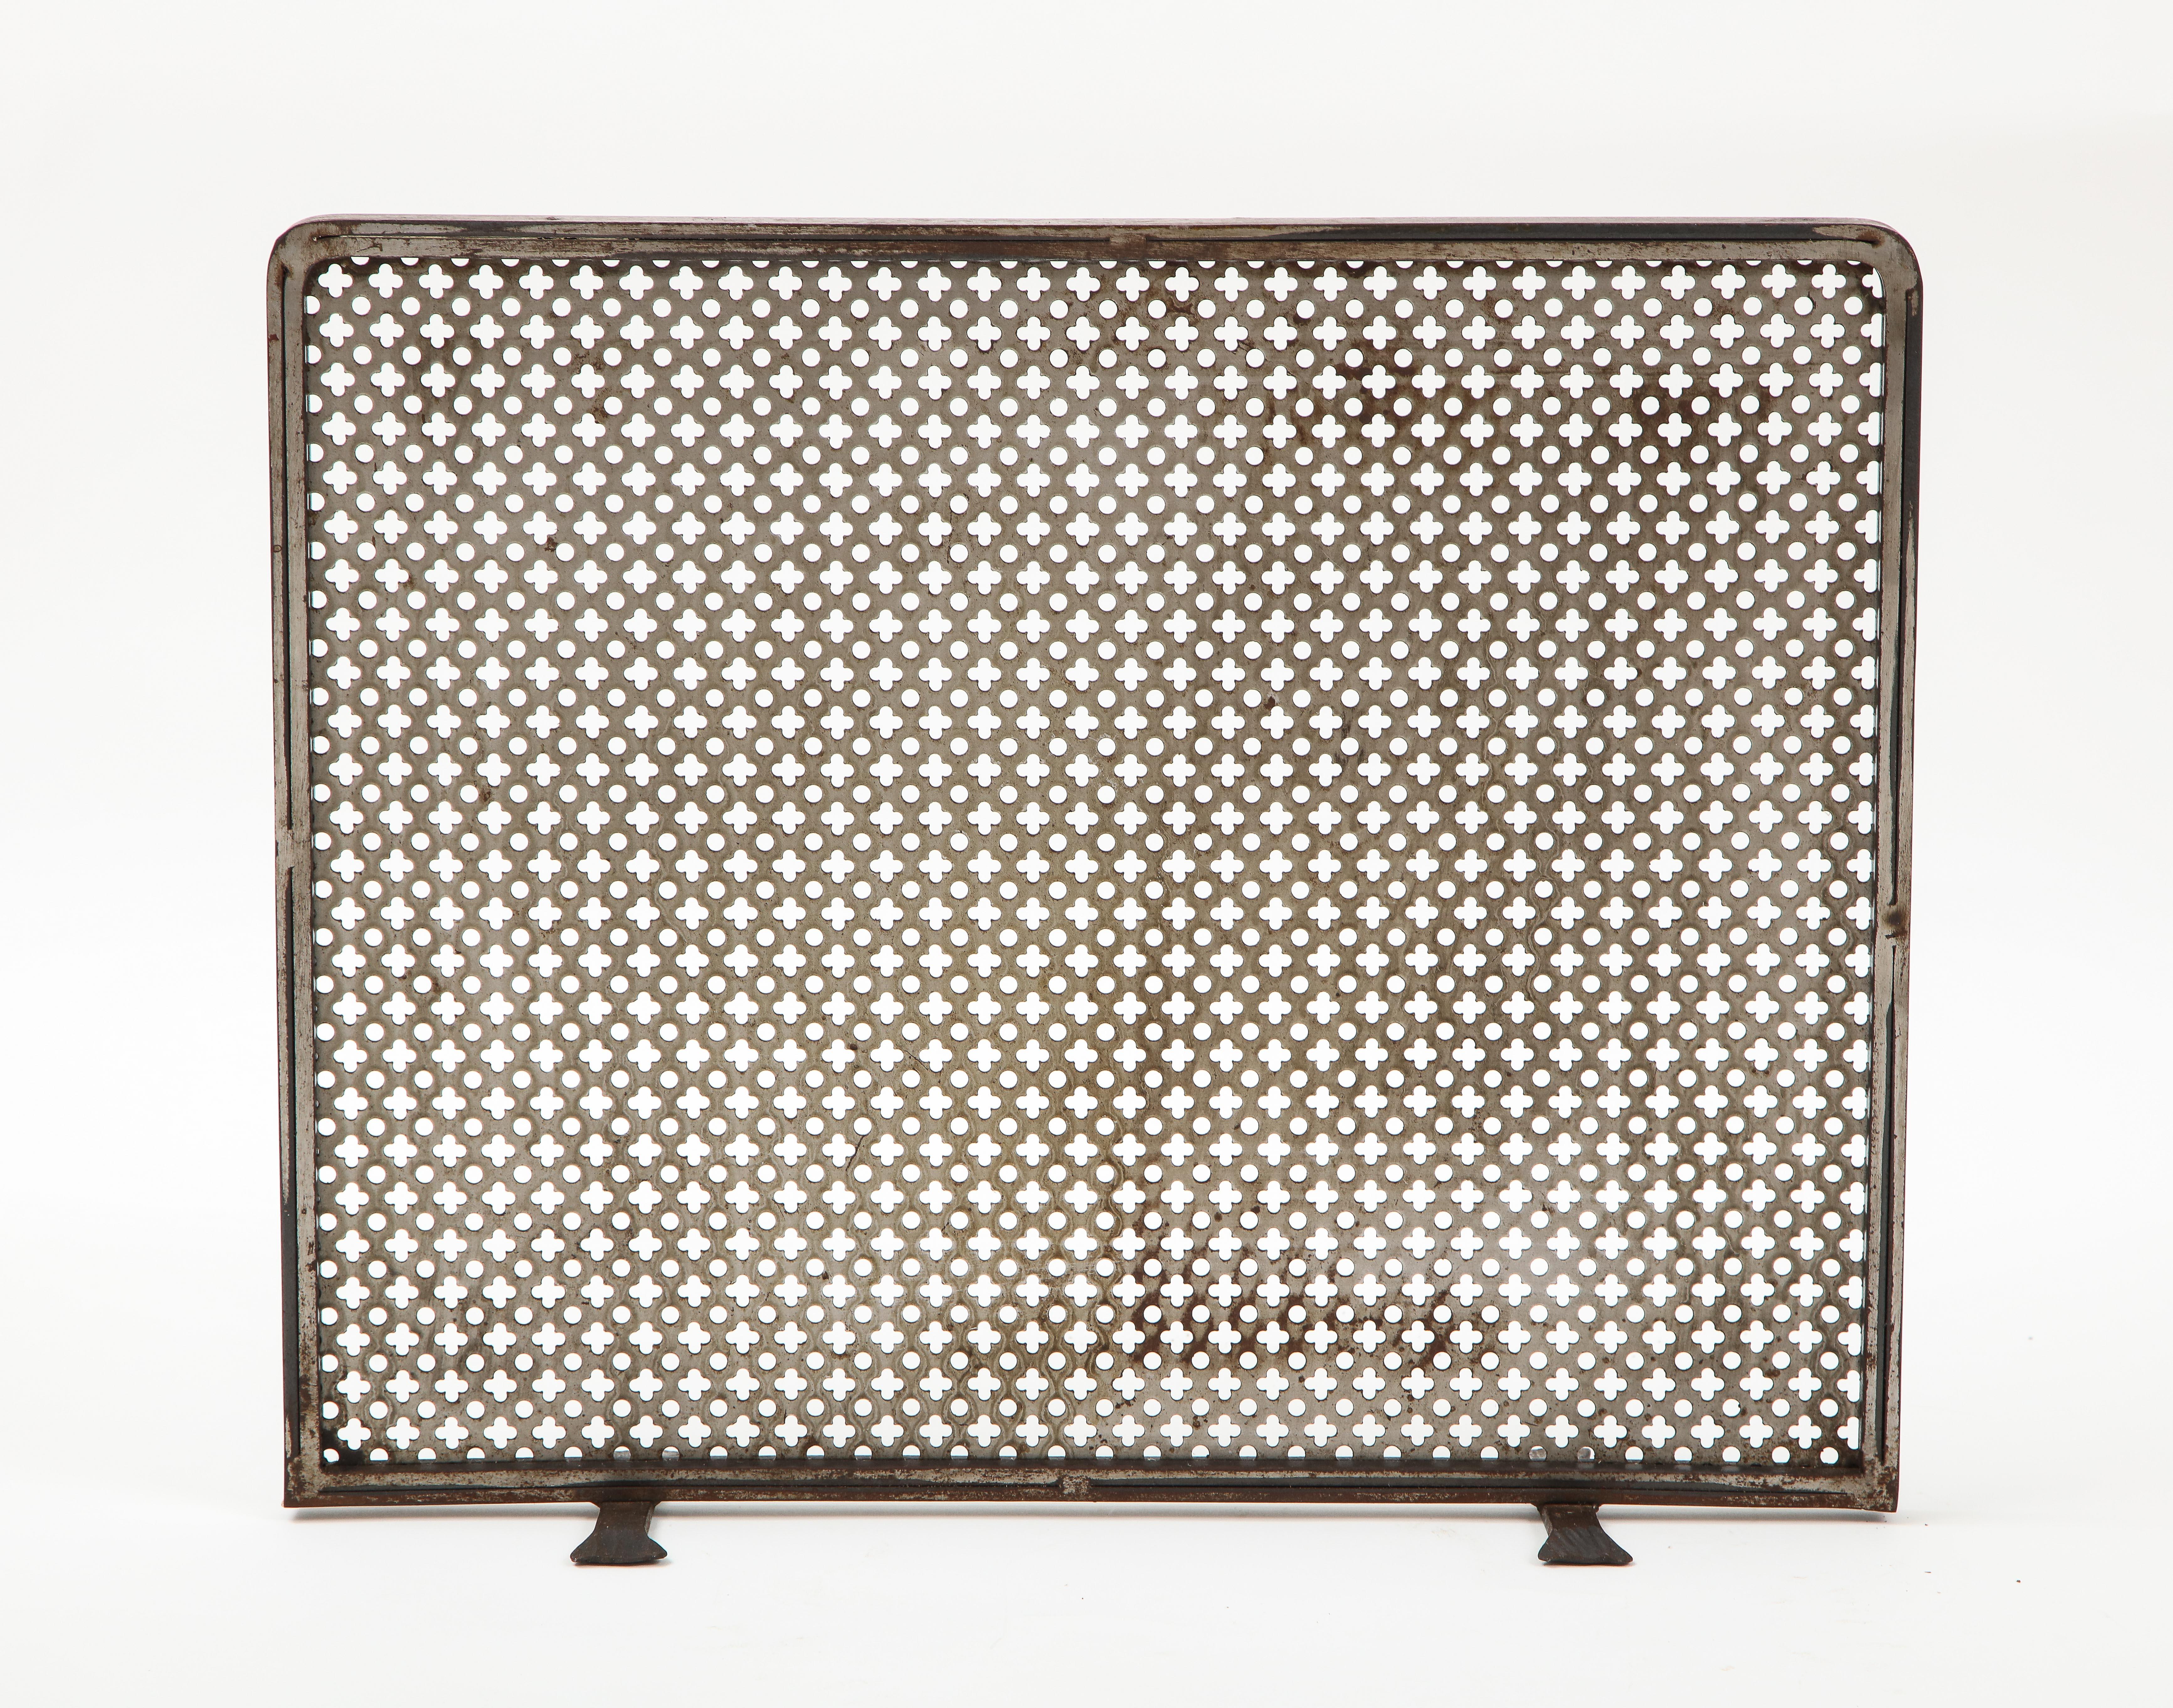 Metal stainless steel fireplace screen in the style of Matthieu Mategot, French, c. 1950
Beautiful patina, (Feet are 5